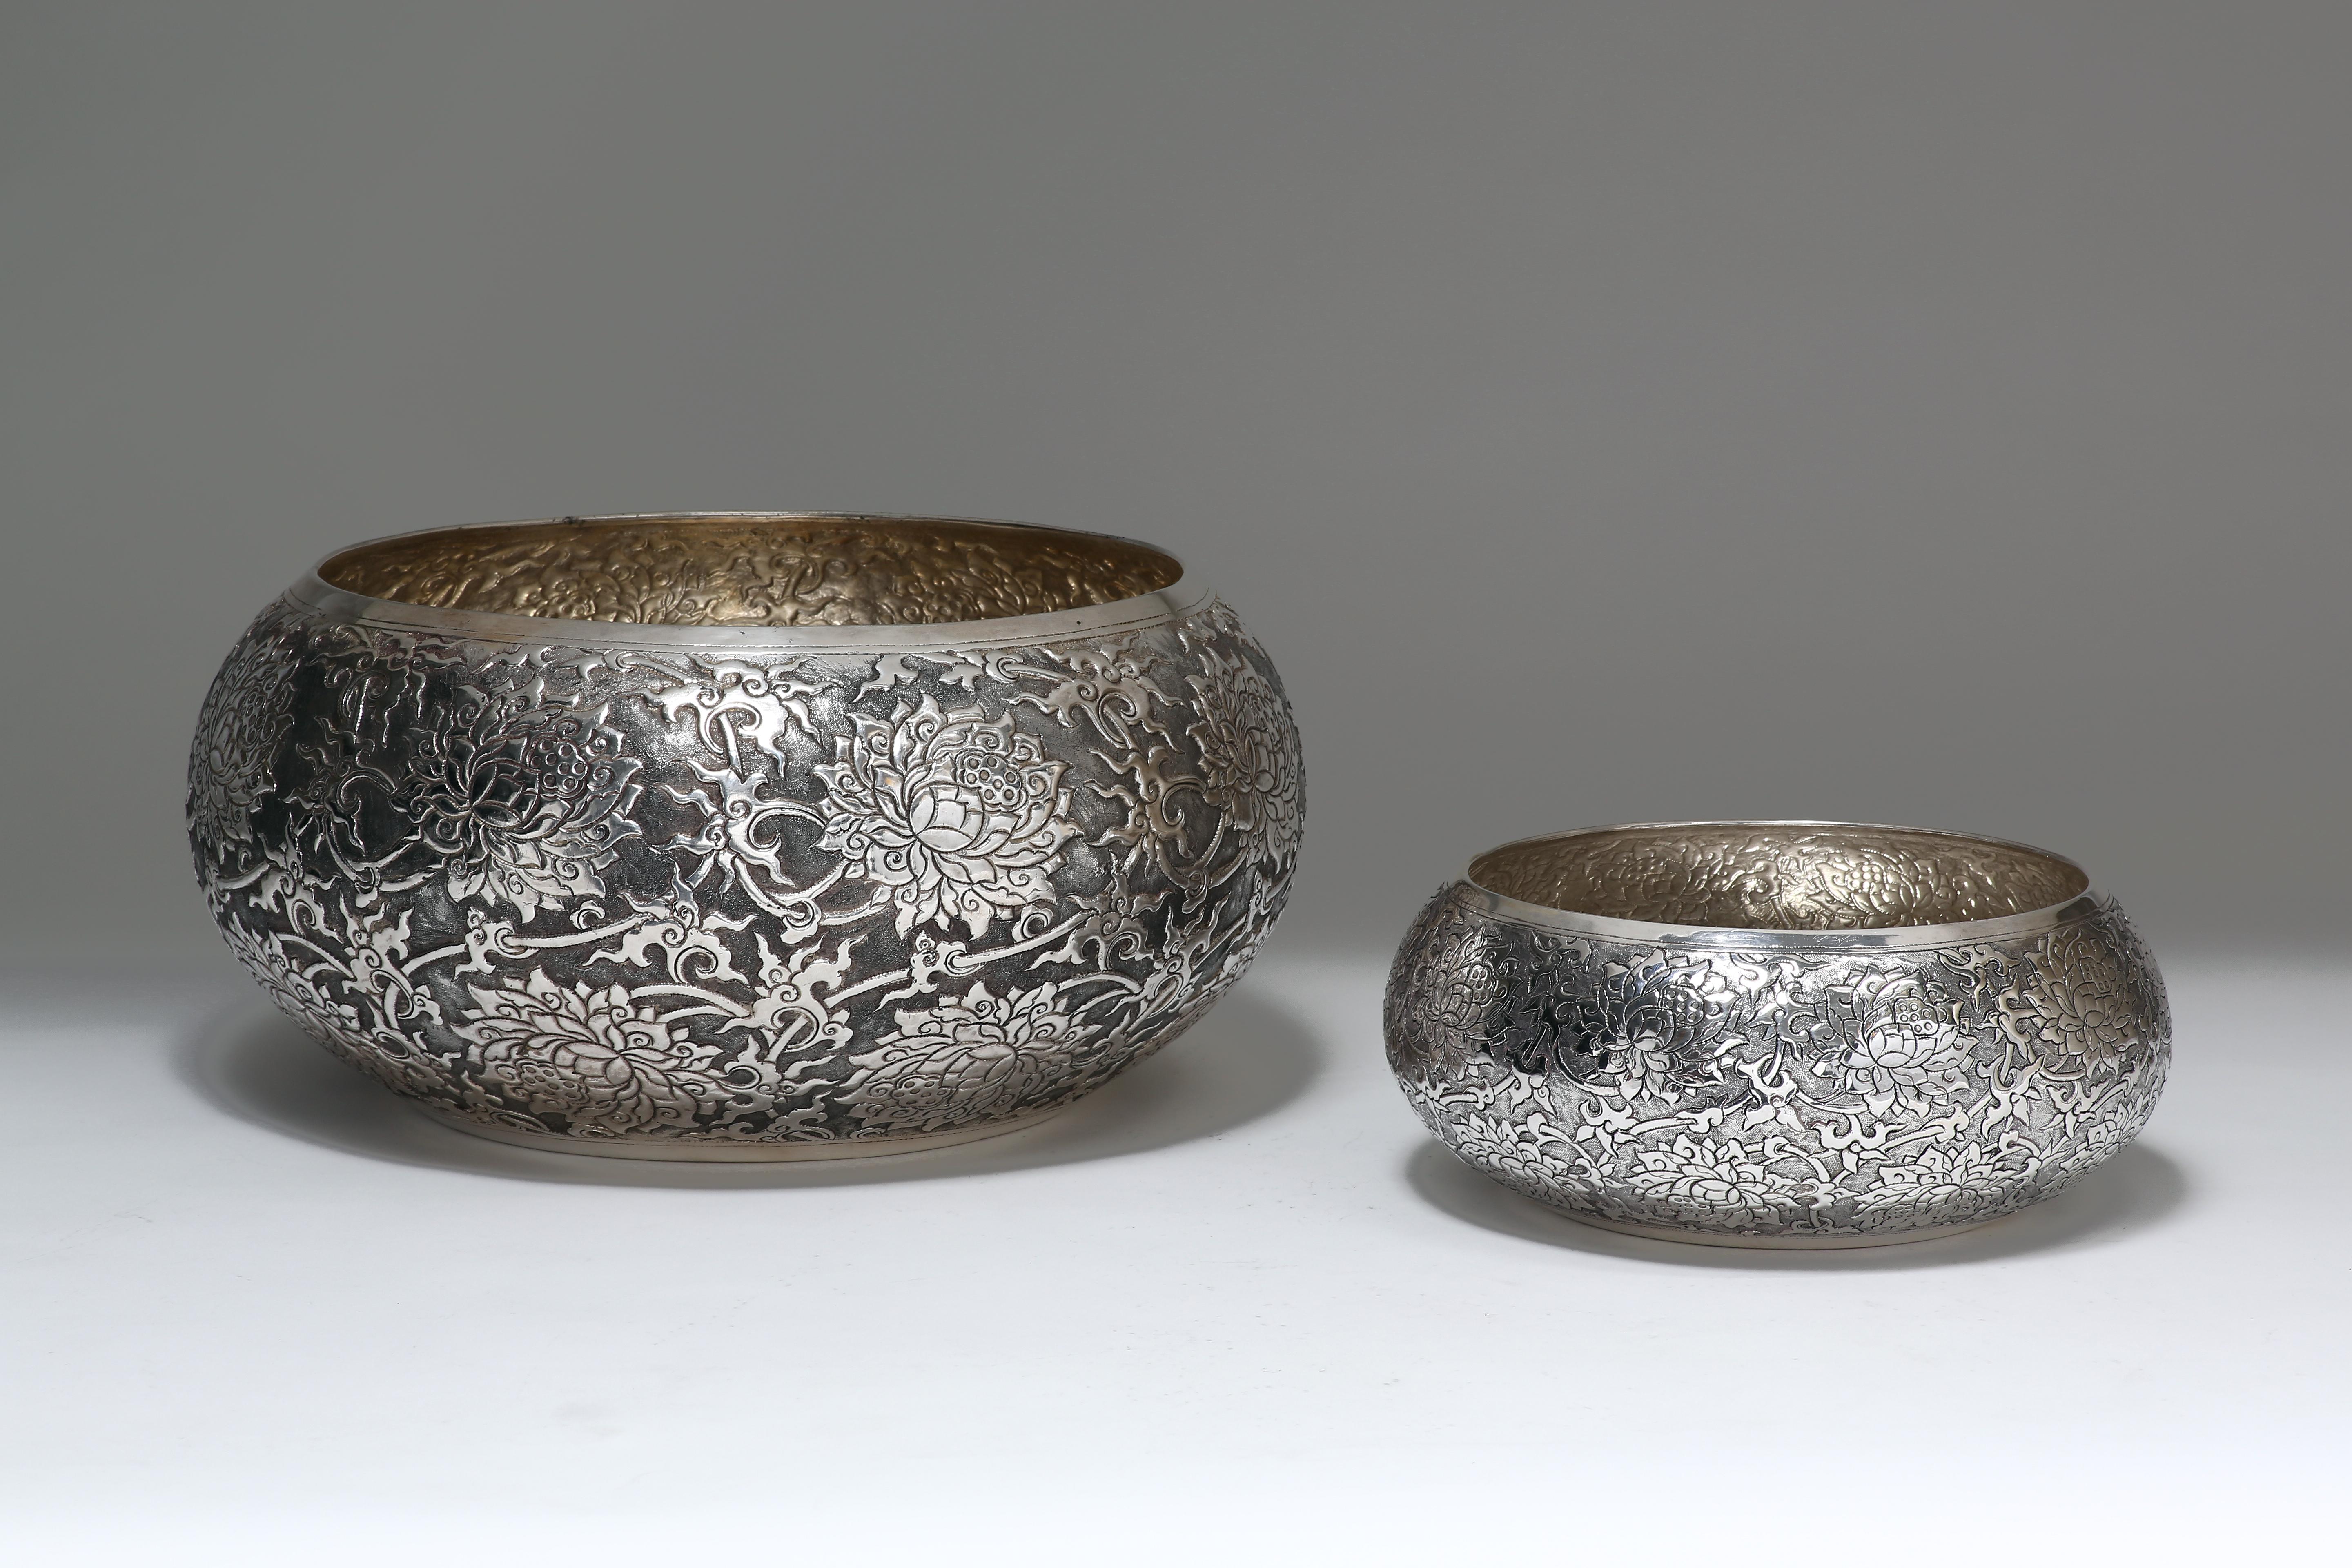 Cambodian Contemporary Hand-Worked Solid Silver Bowl, Lotus Motif, Centerpiece